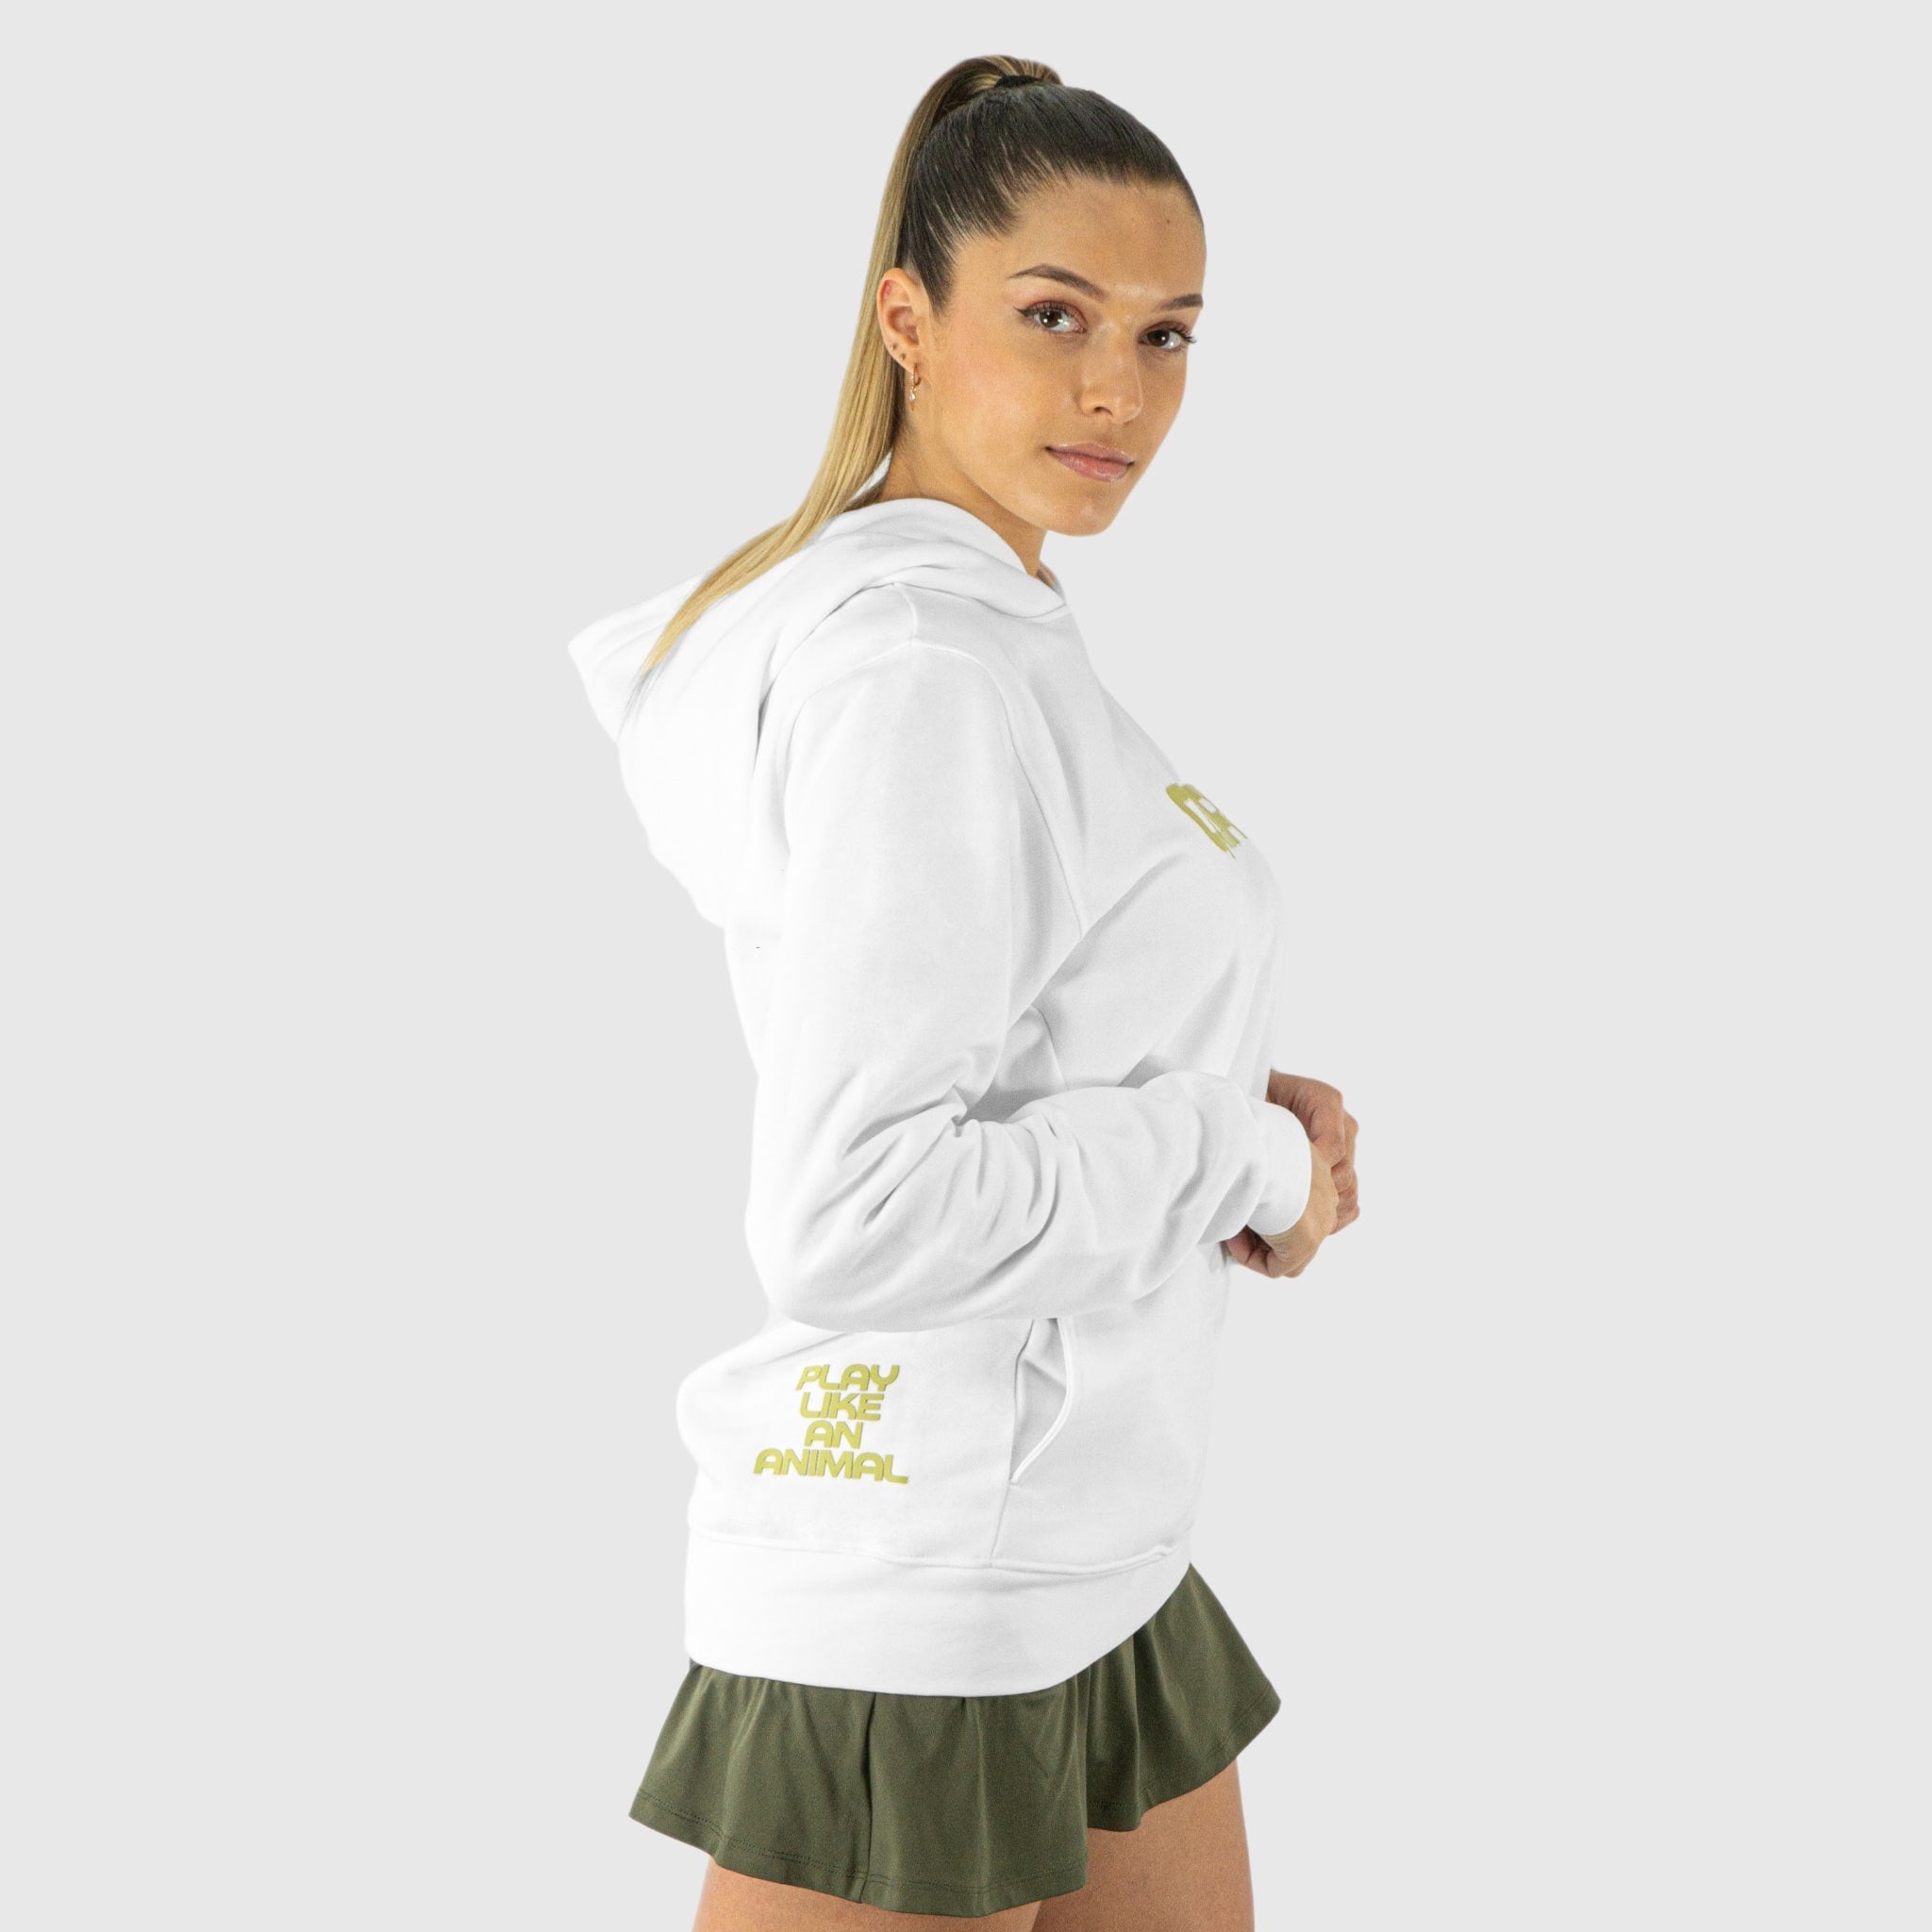 Quad Padel women comfy hoodie white right side